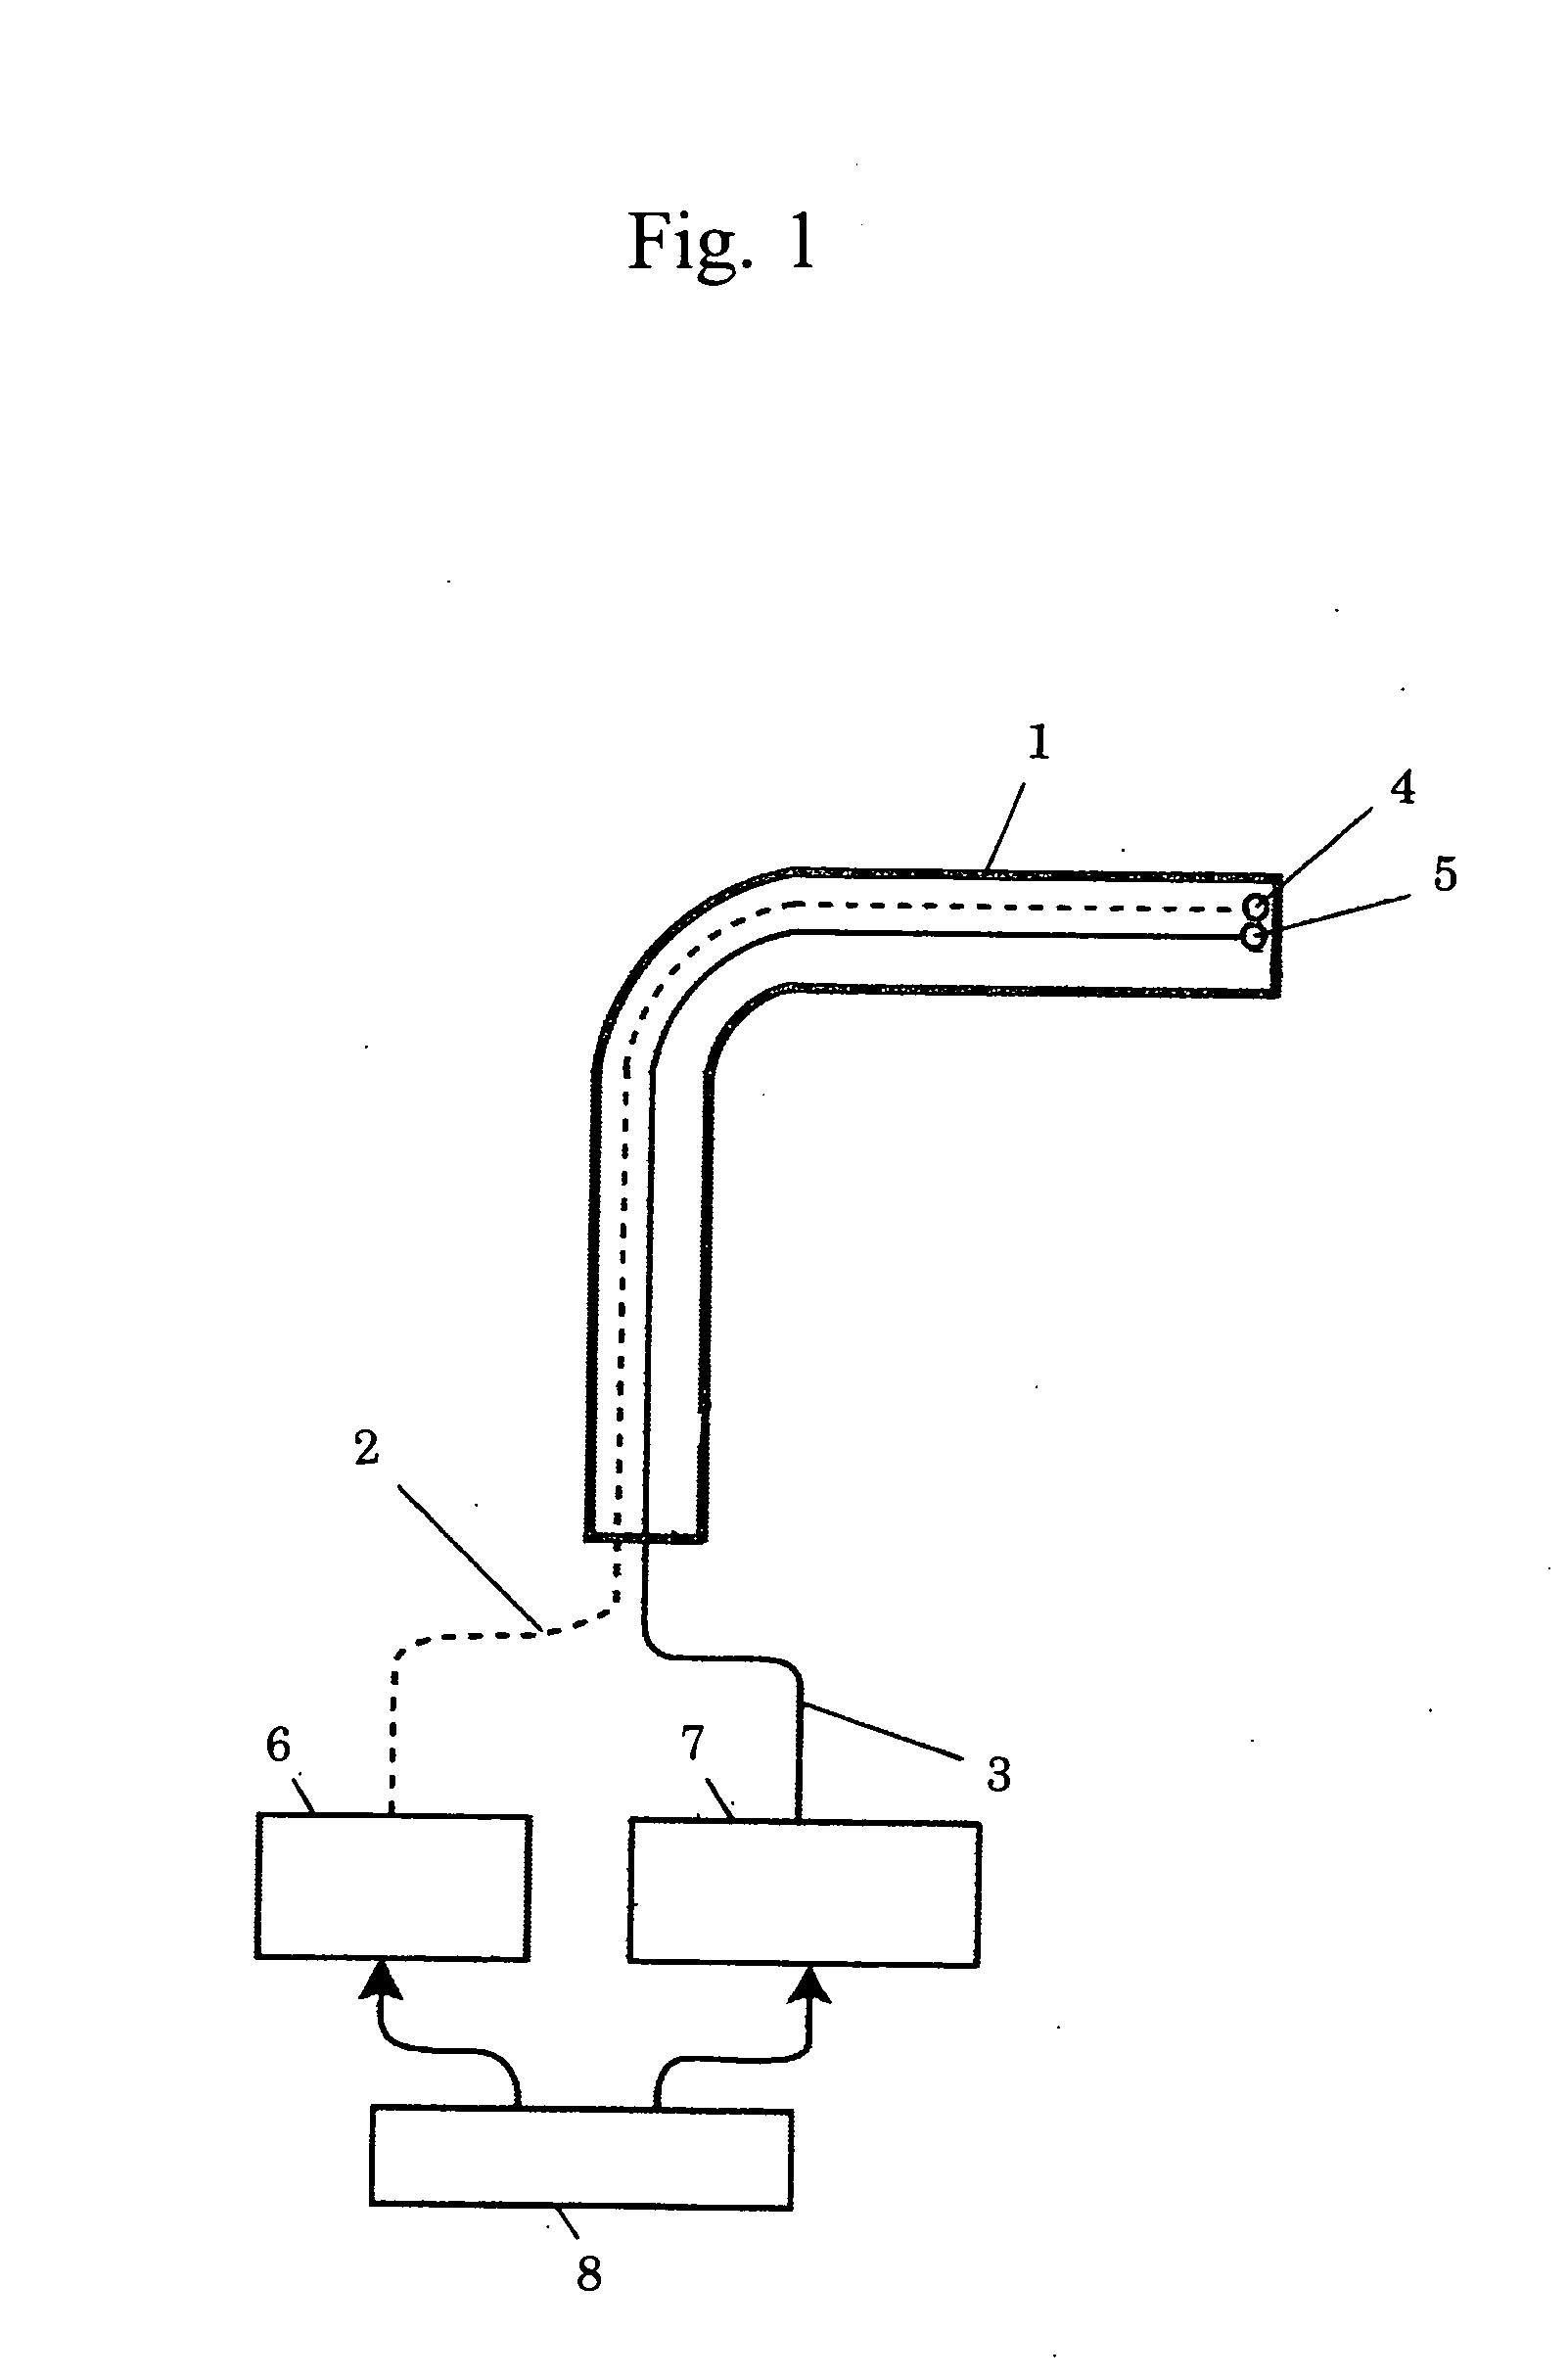 Intravascular Diagnostic or Therapeutic Apparatus Using High-Intensity Pulsed Light